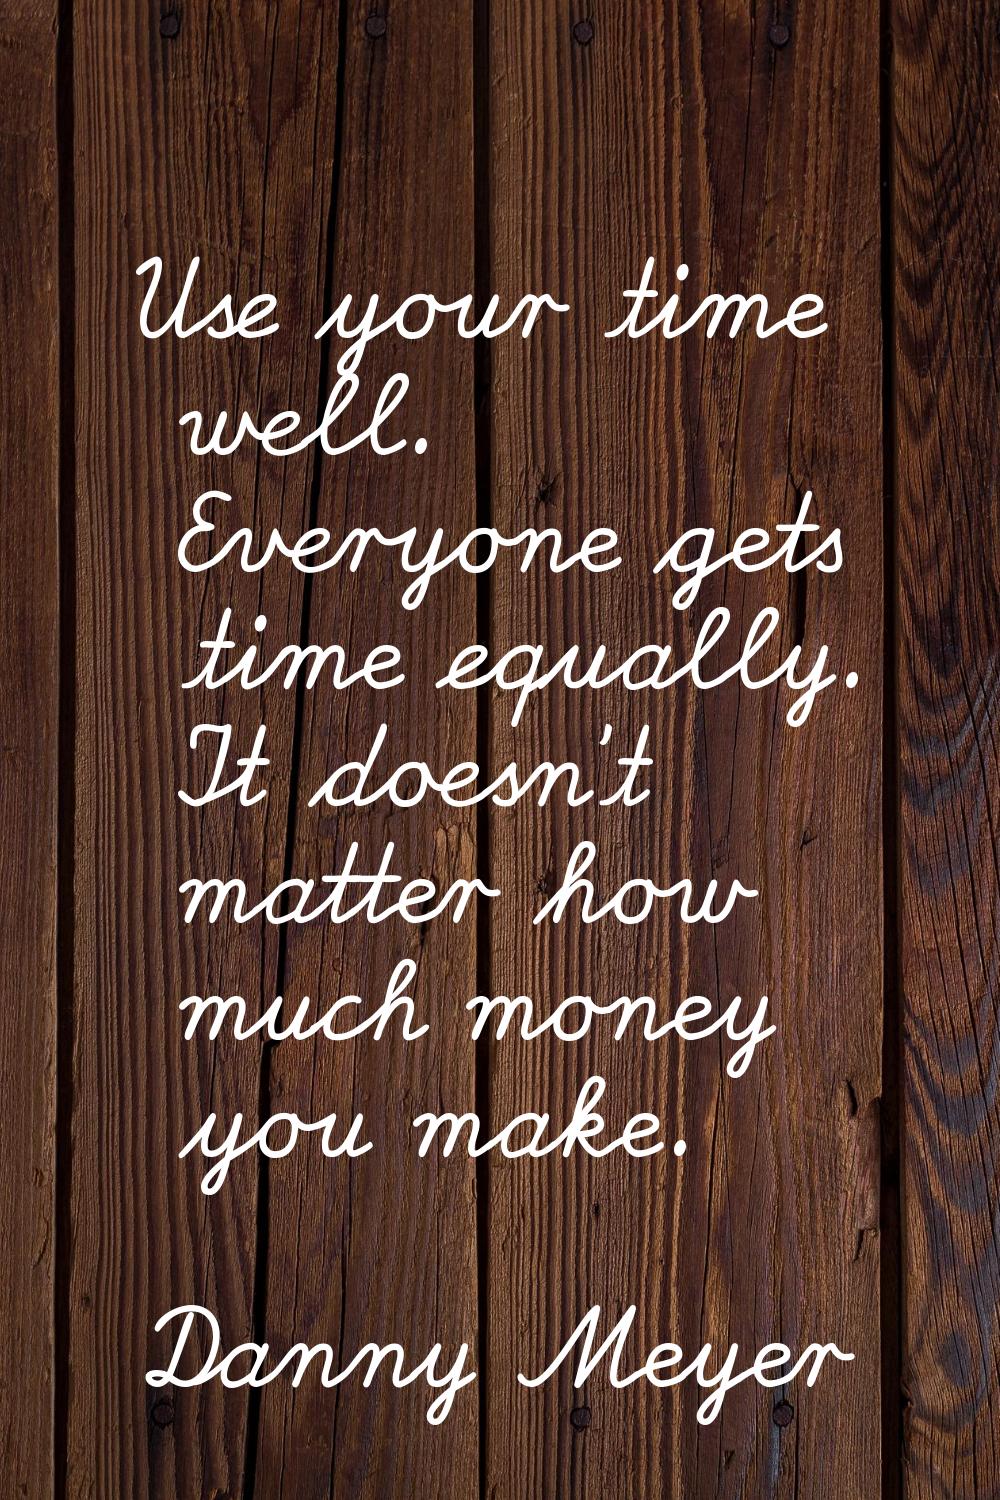 Use your time well. Everyone gets time equally. It doesn't matter how much money you make.